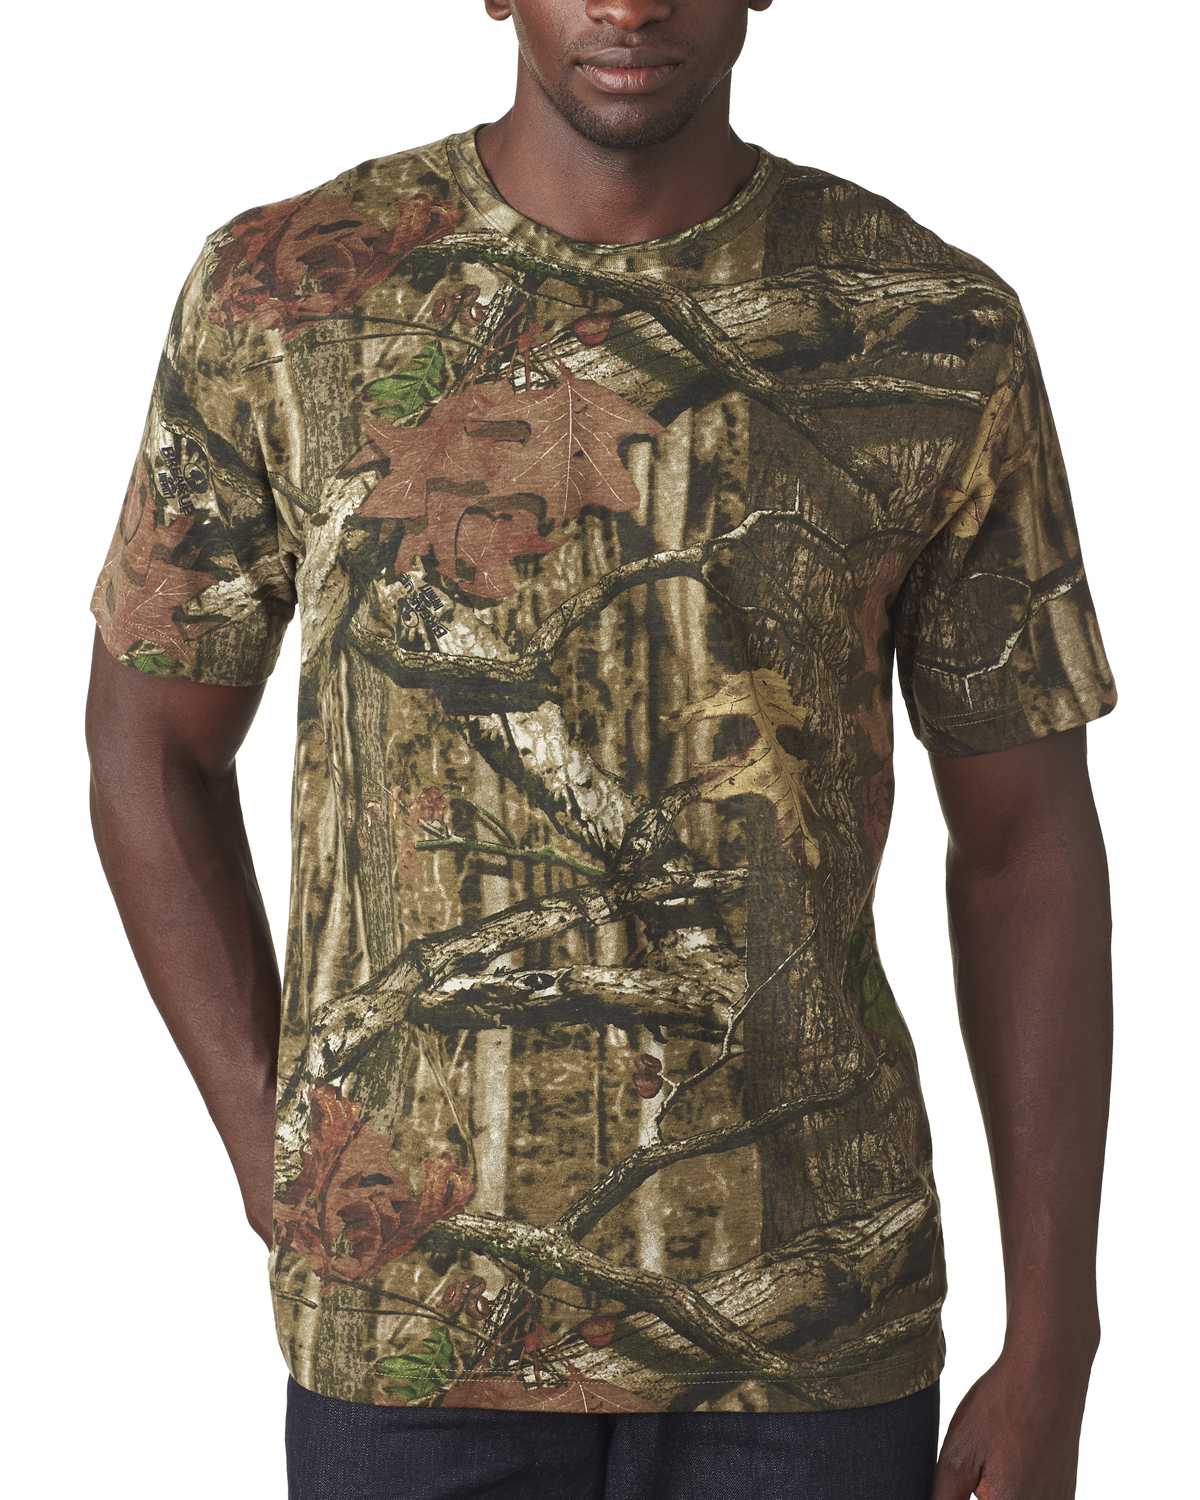 Code Five 3970 Adult MOSSY OAK Camouflage T-Shirt | ApparelChoice.com